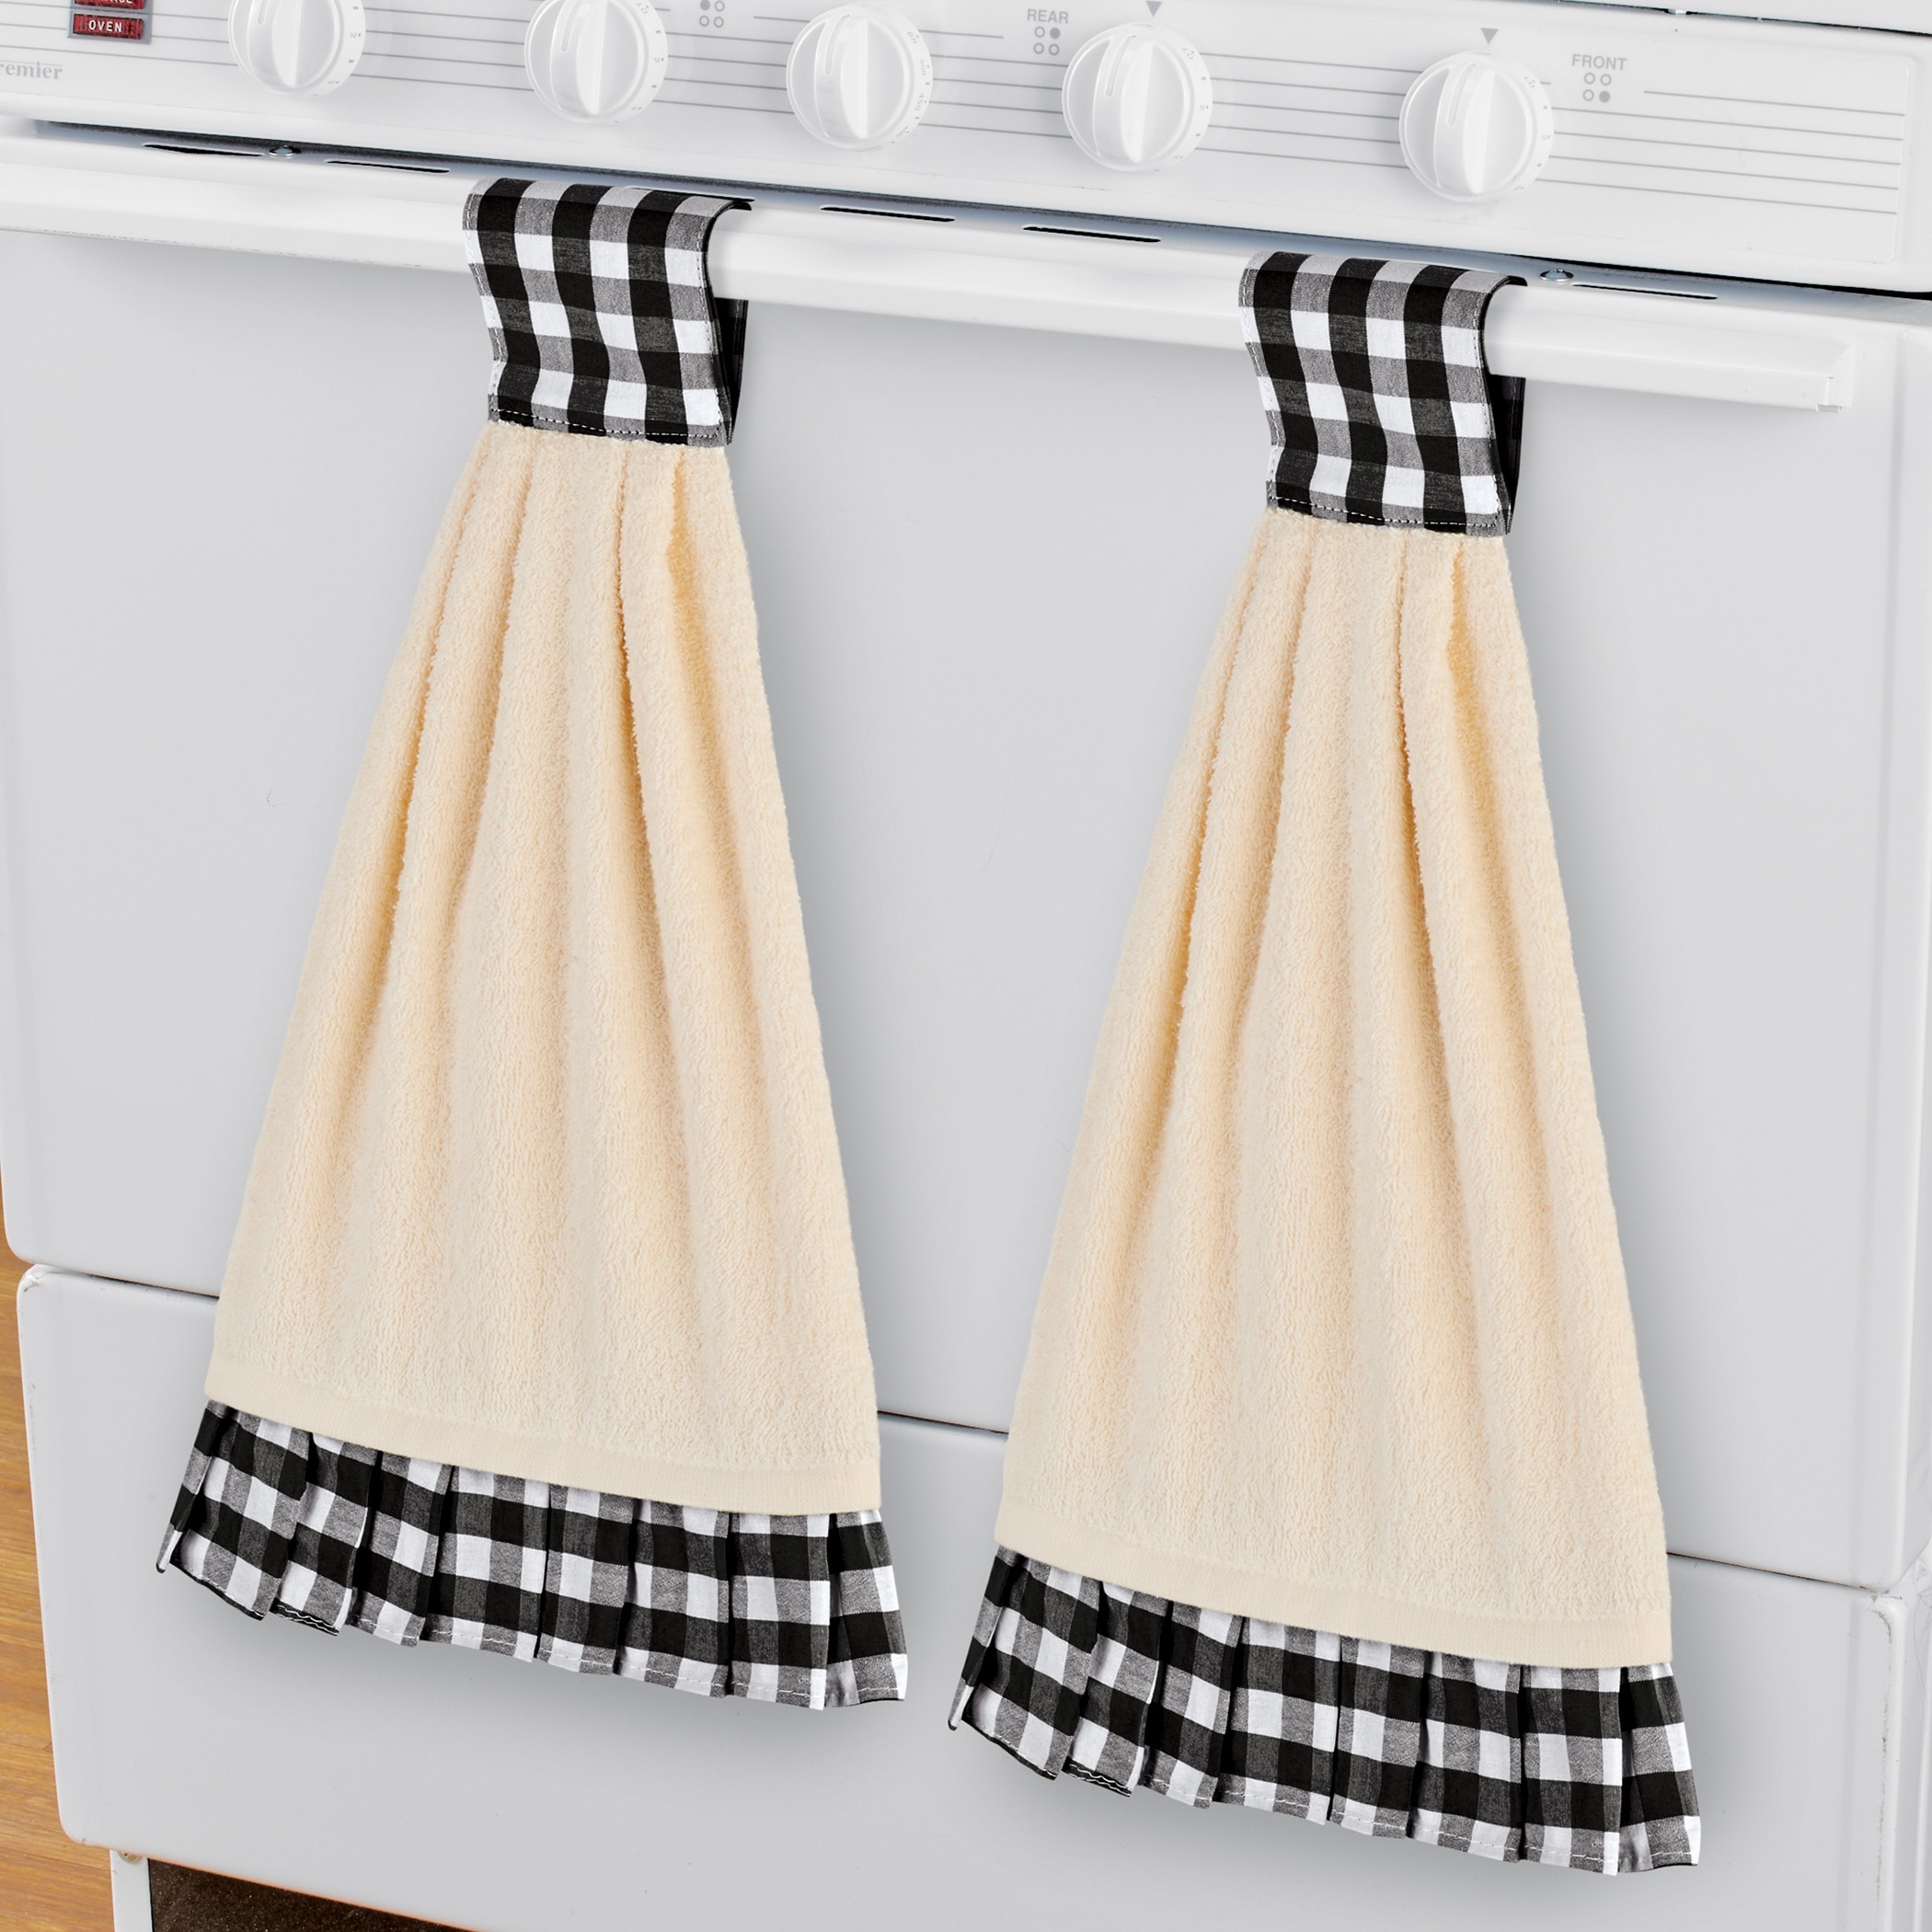 https://ak1.ostkcdn.com/images/products/is/images/direct/e1cdecd7a65266e57d26e31e9c87494d249a9823/S-2-Buffalo-Plaid-Hang-Towels.jpg